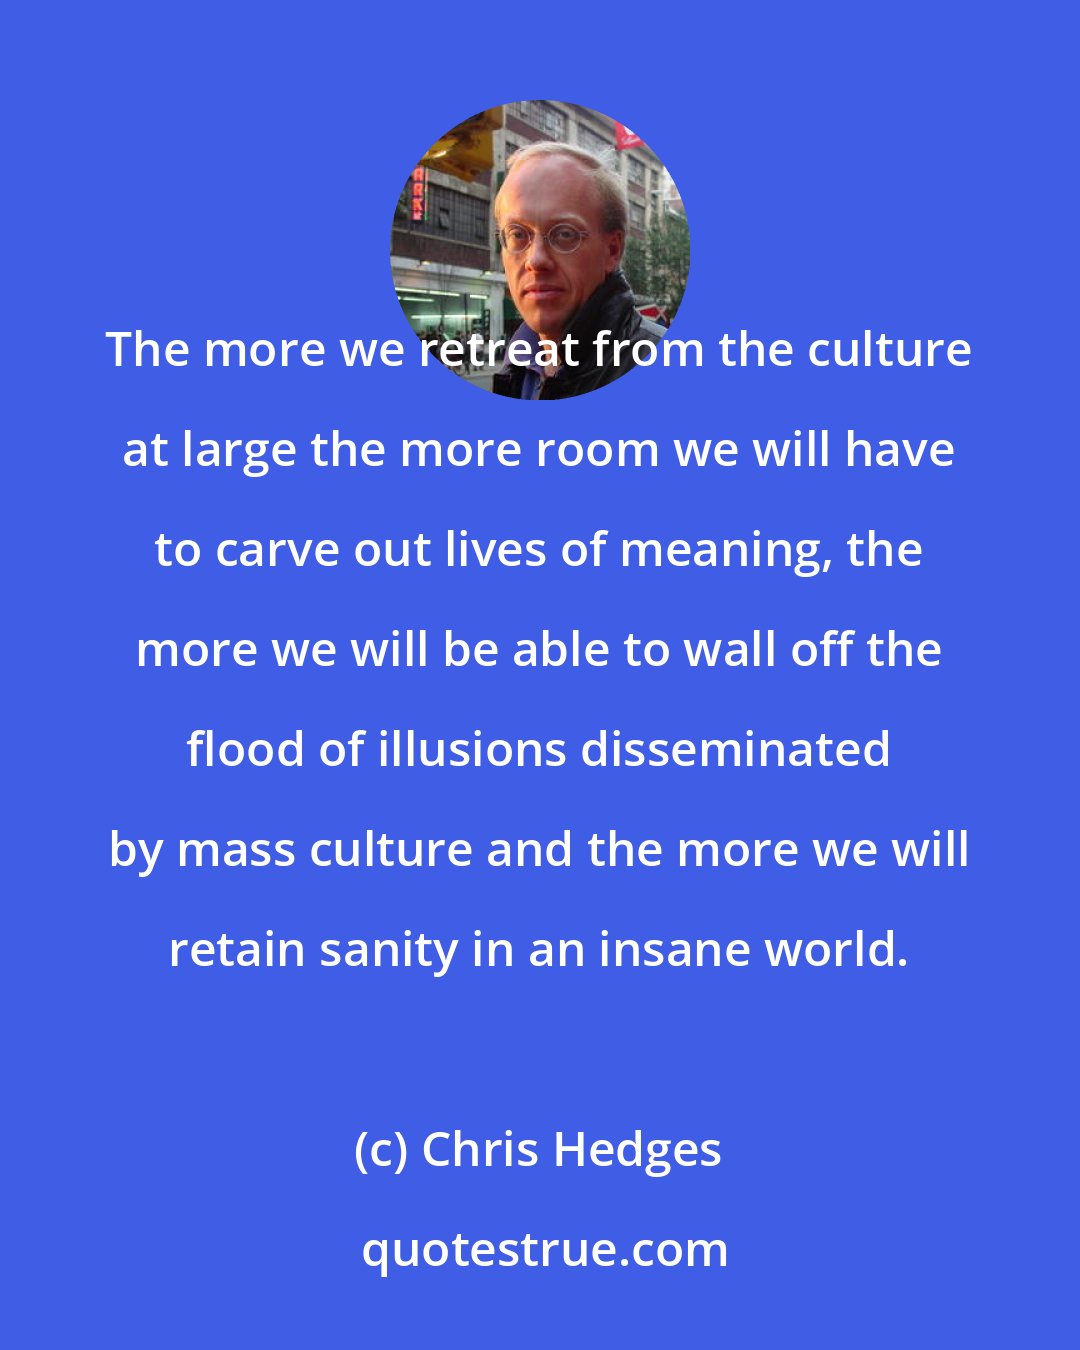 Chris Hedges: The more we retreat from the culture at large the more room we will have to carve out lives of meaning, the more we will be able to wall off the flood of illusions disseminated by mass culture and the more we will retain sanity in an insane world.